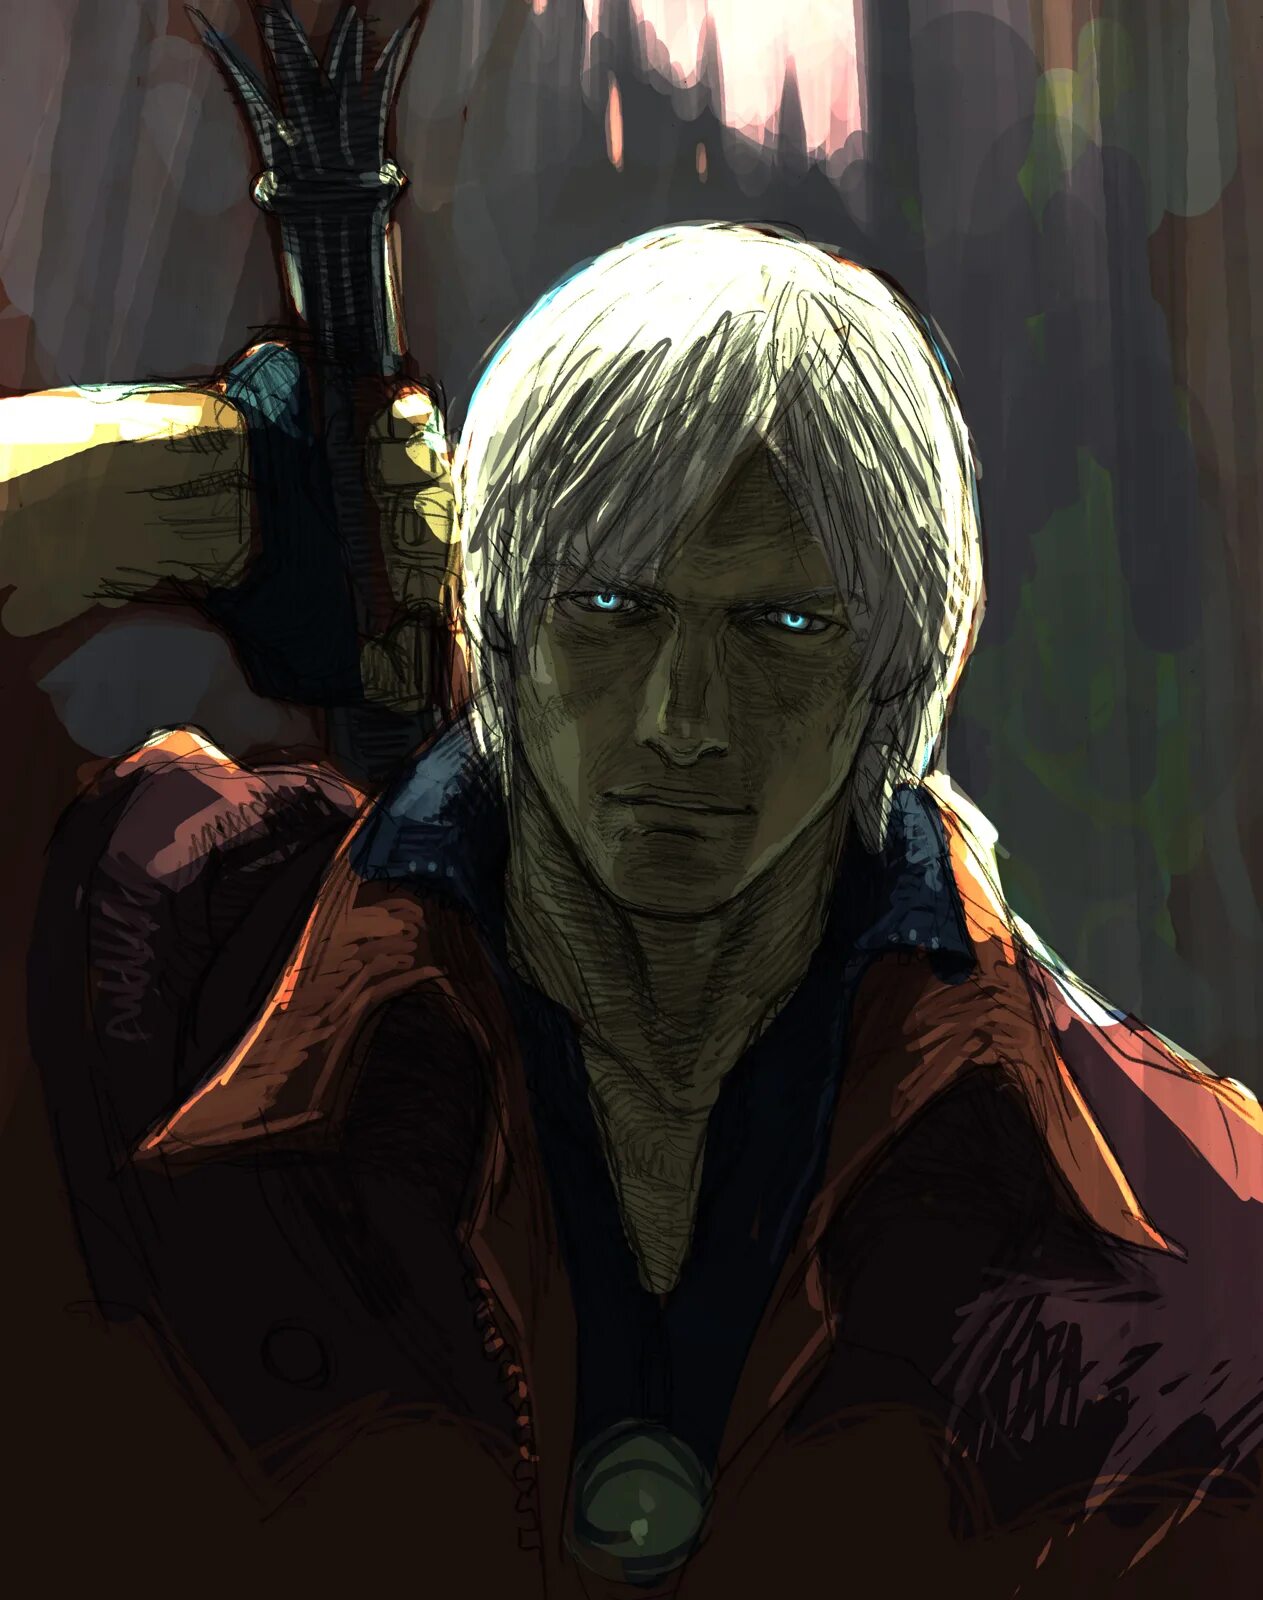 Данте Devil May Cry. Devil May Cry 4 Данте. Данте Devil May Cry 2013. Данте Devil May Cry 2. Dmc art